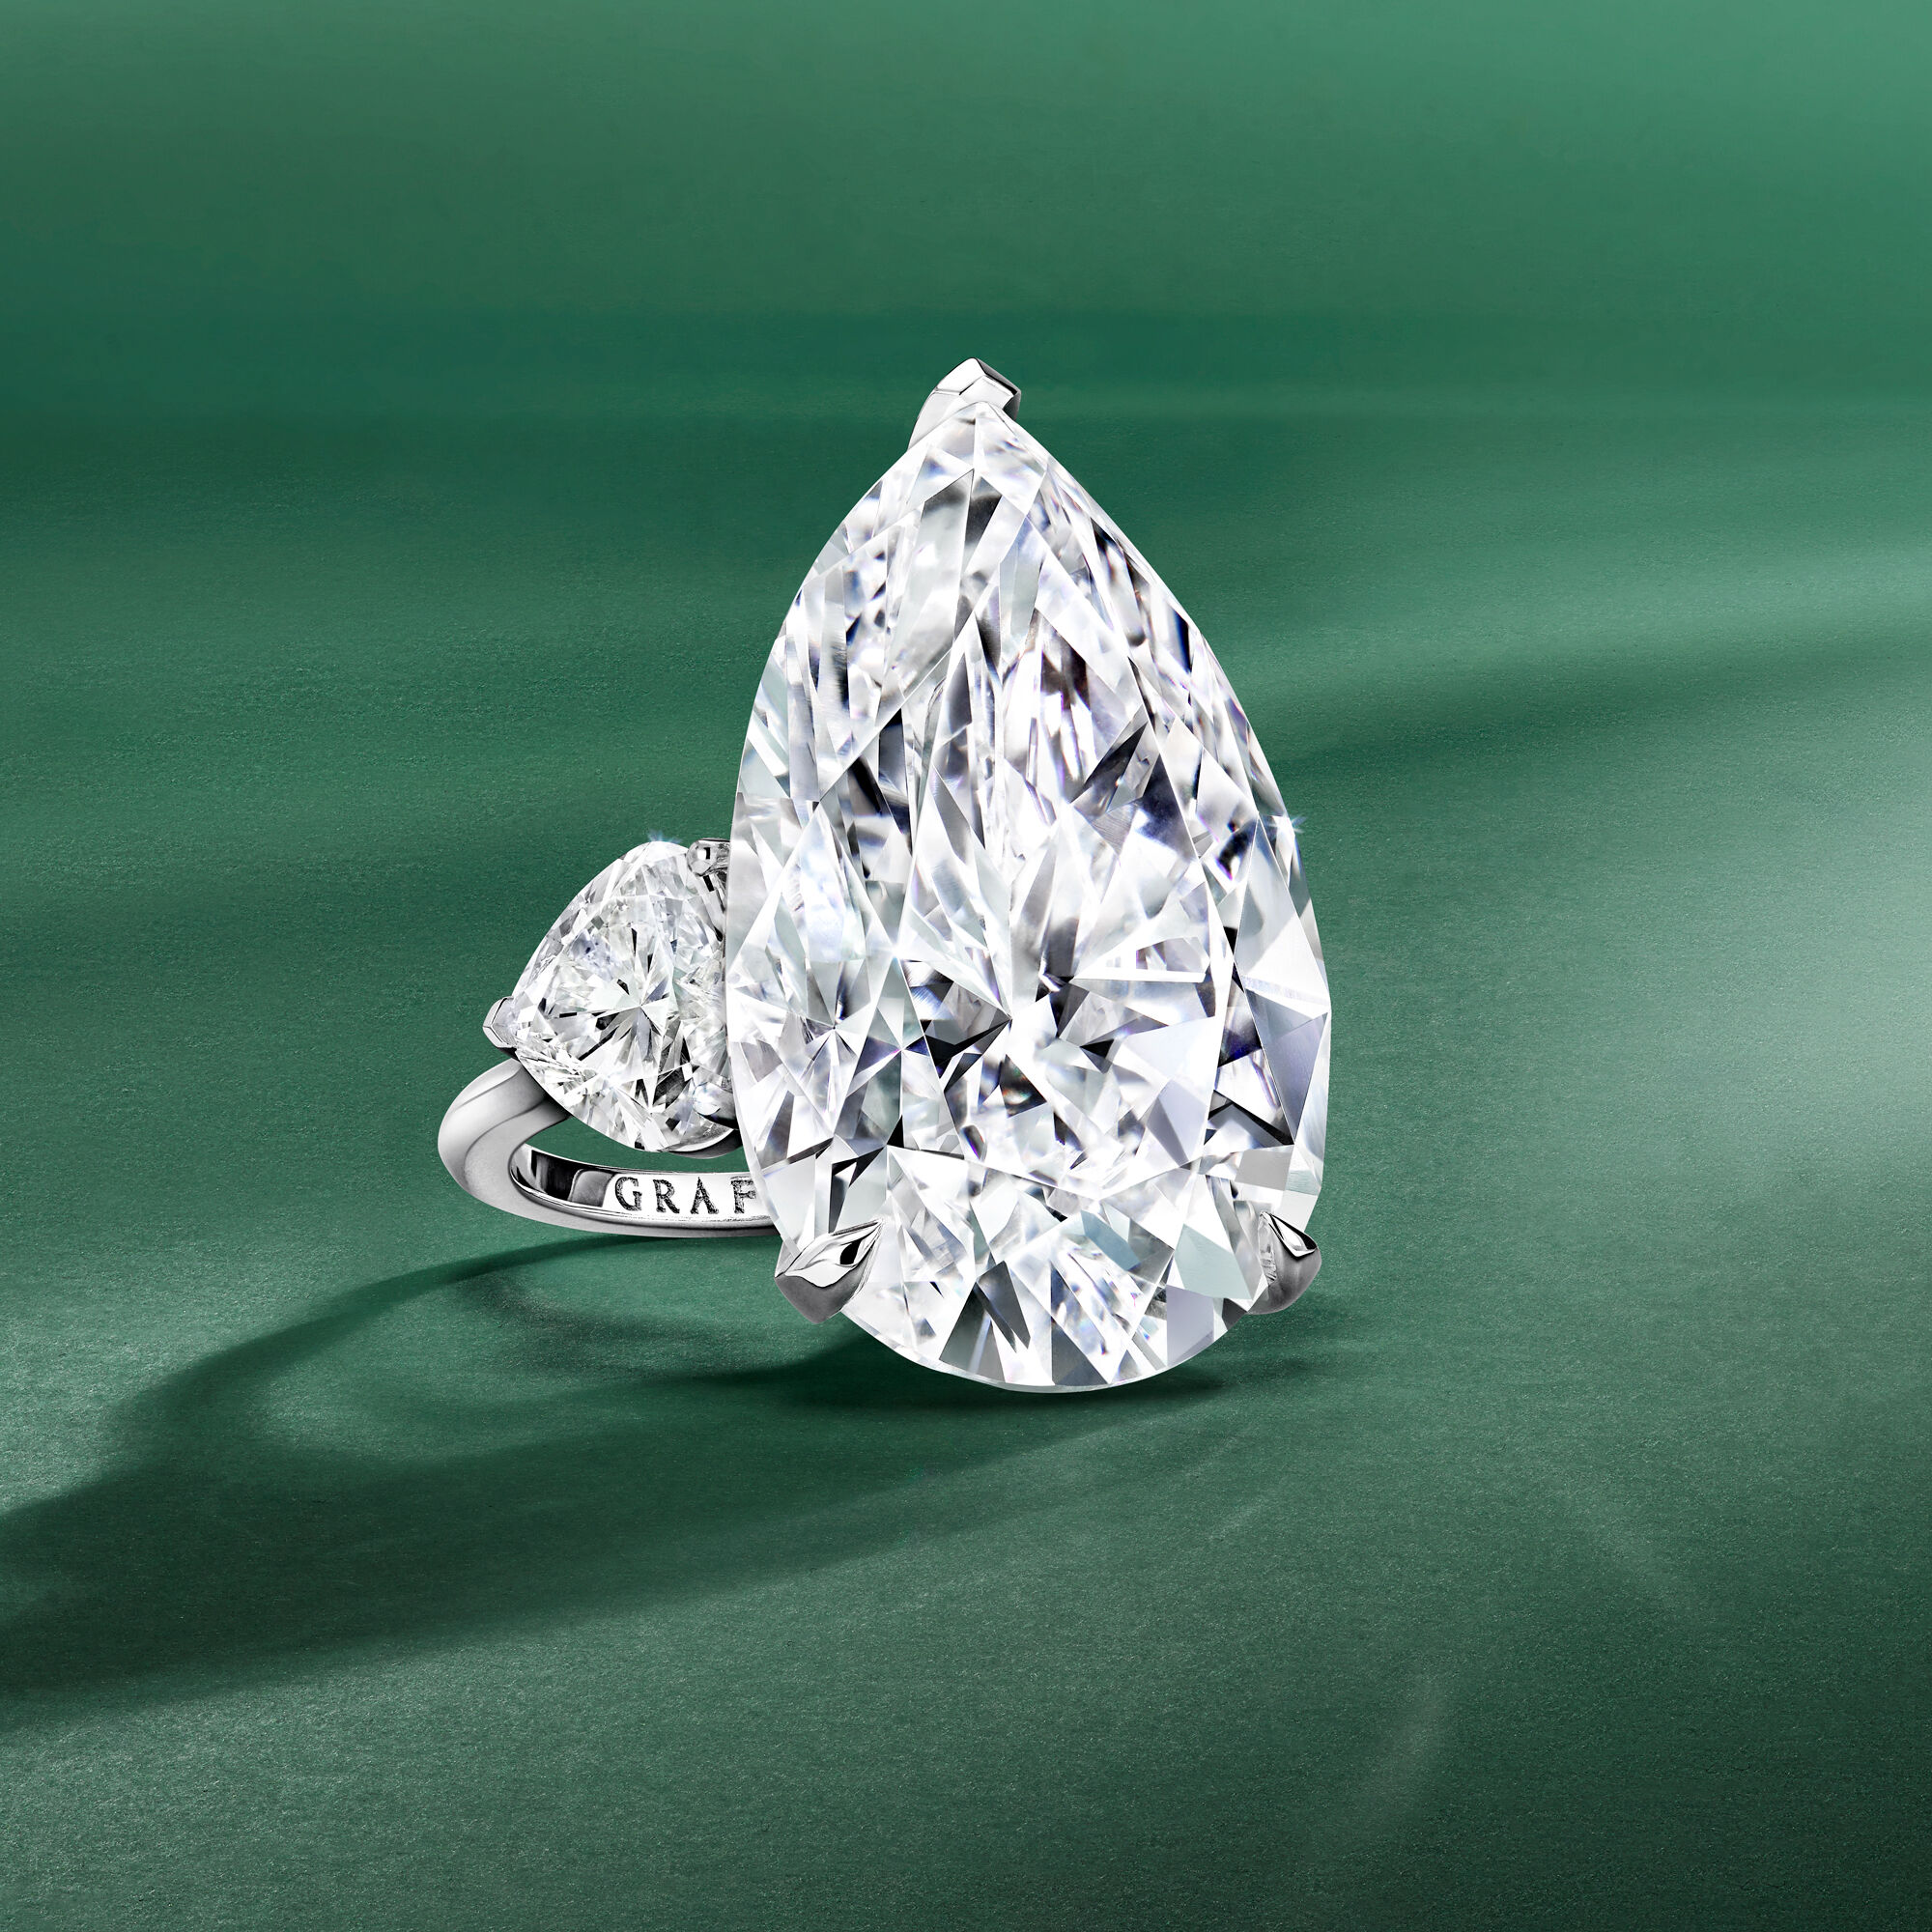 Image of Graff solitaire White Diamond Pear Shape engagement ring 